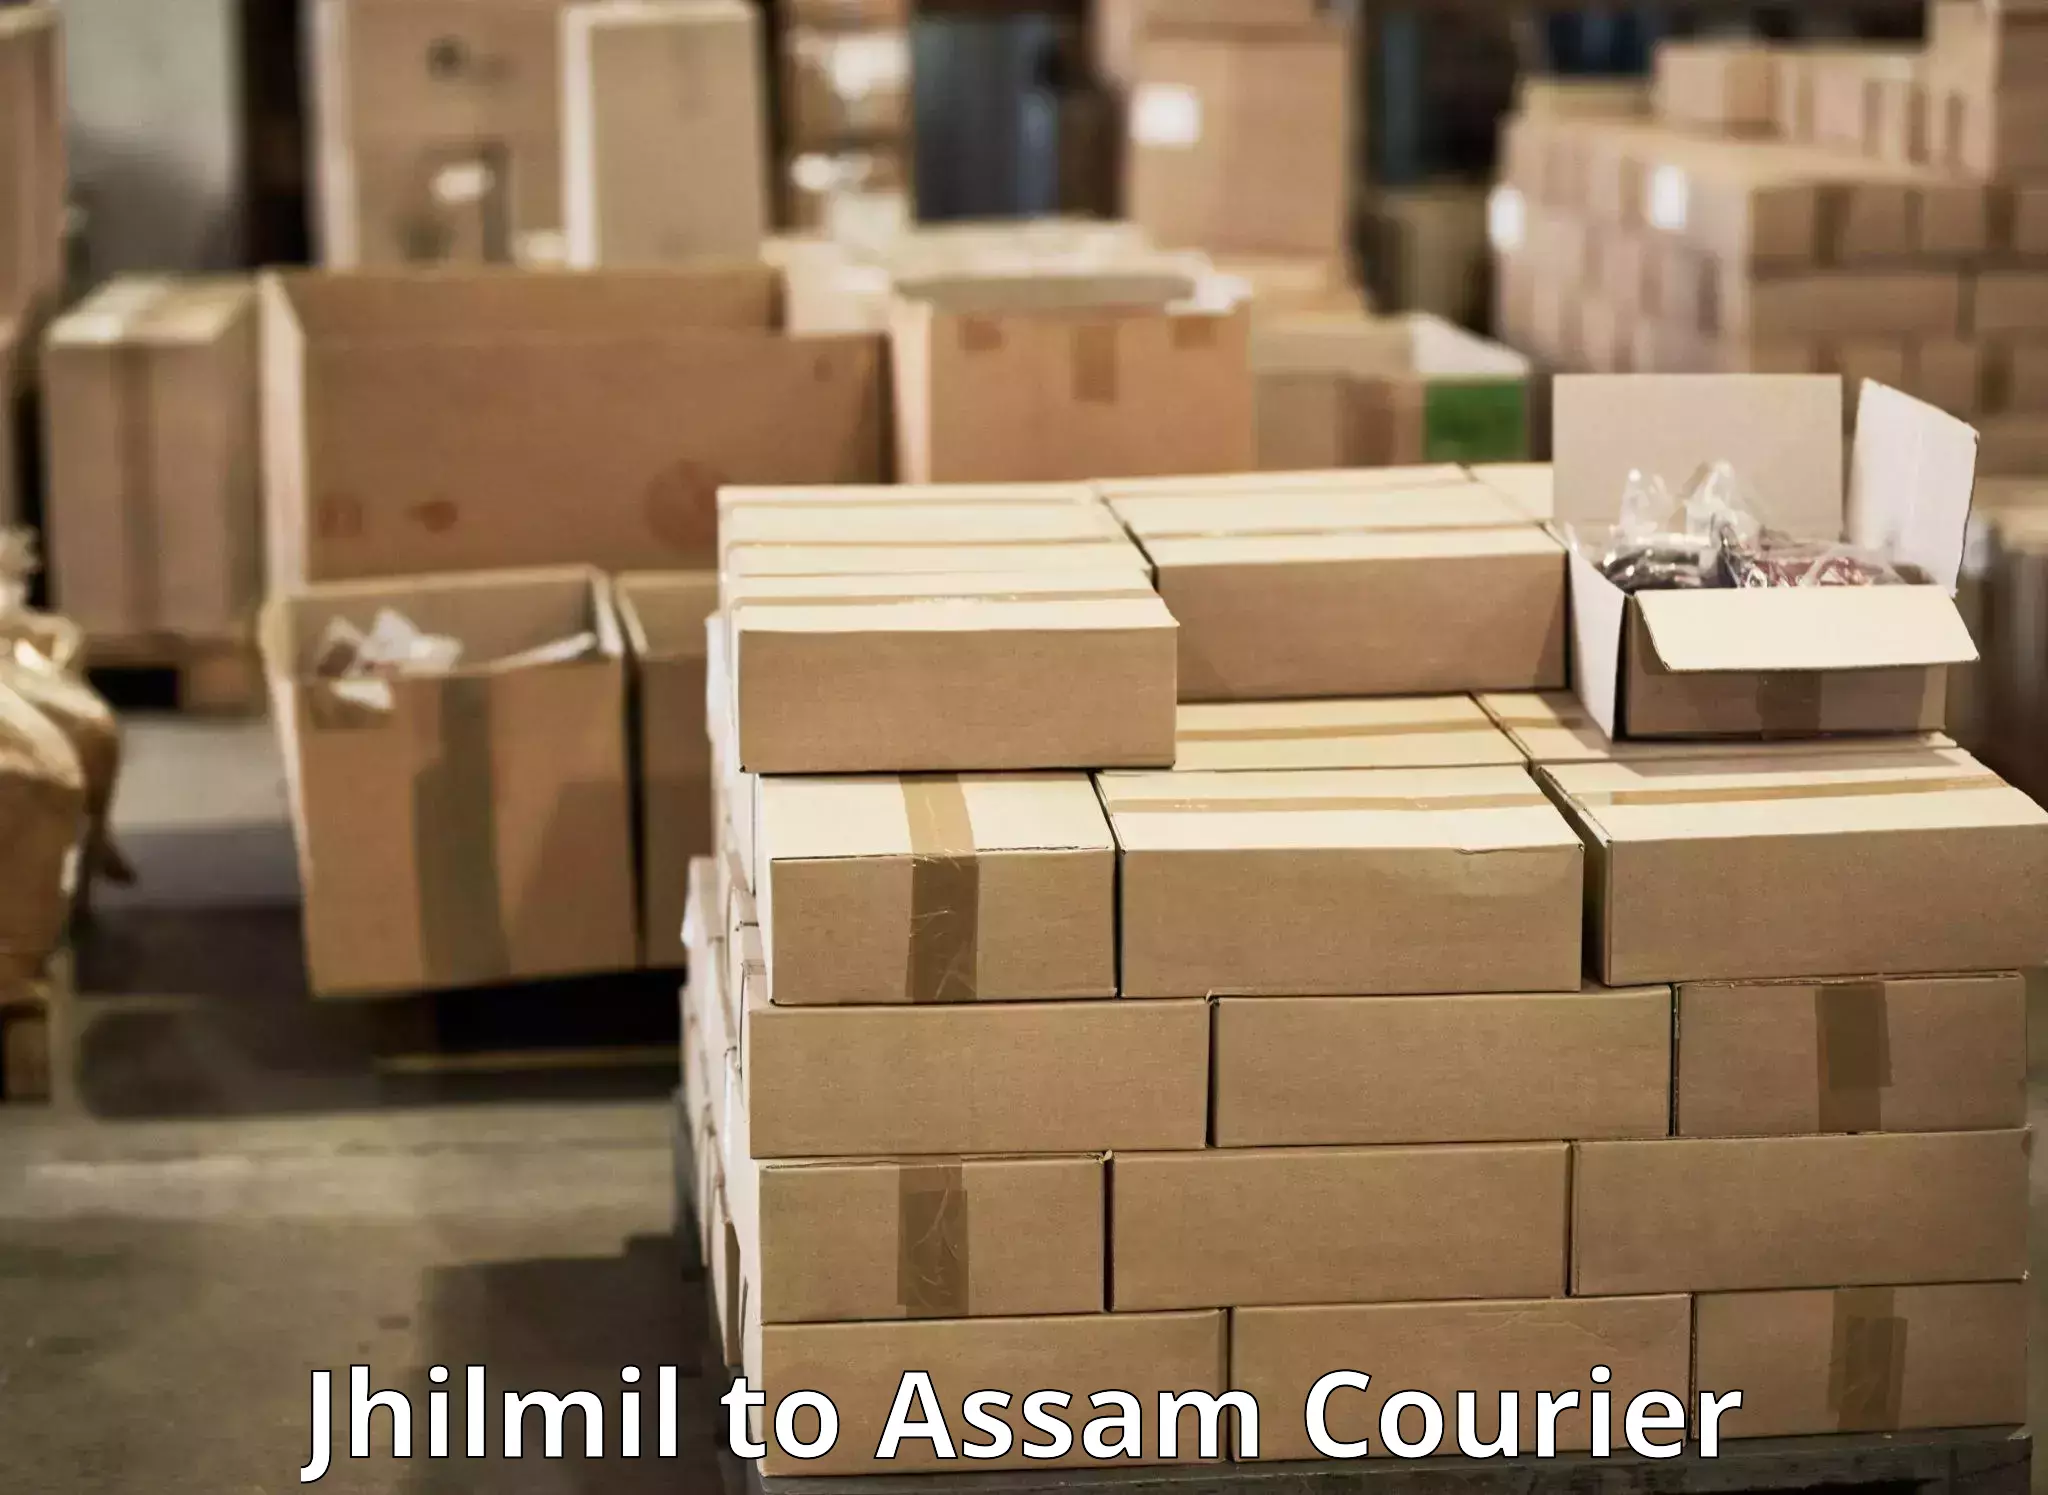 Scheduled delivery in Jhilmil to Banderdewa